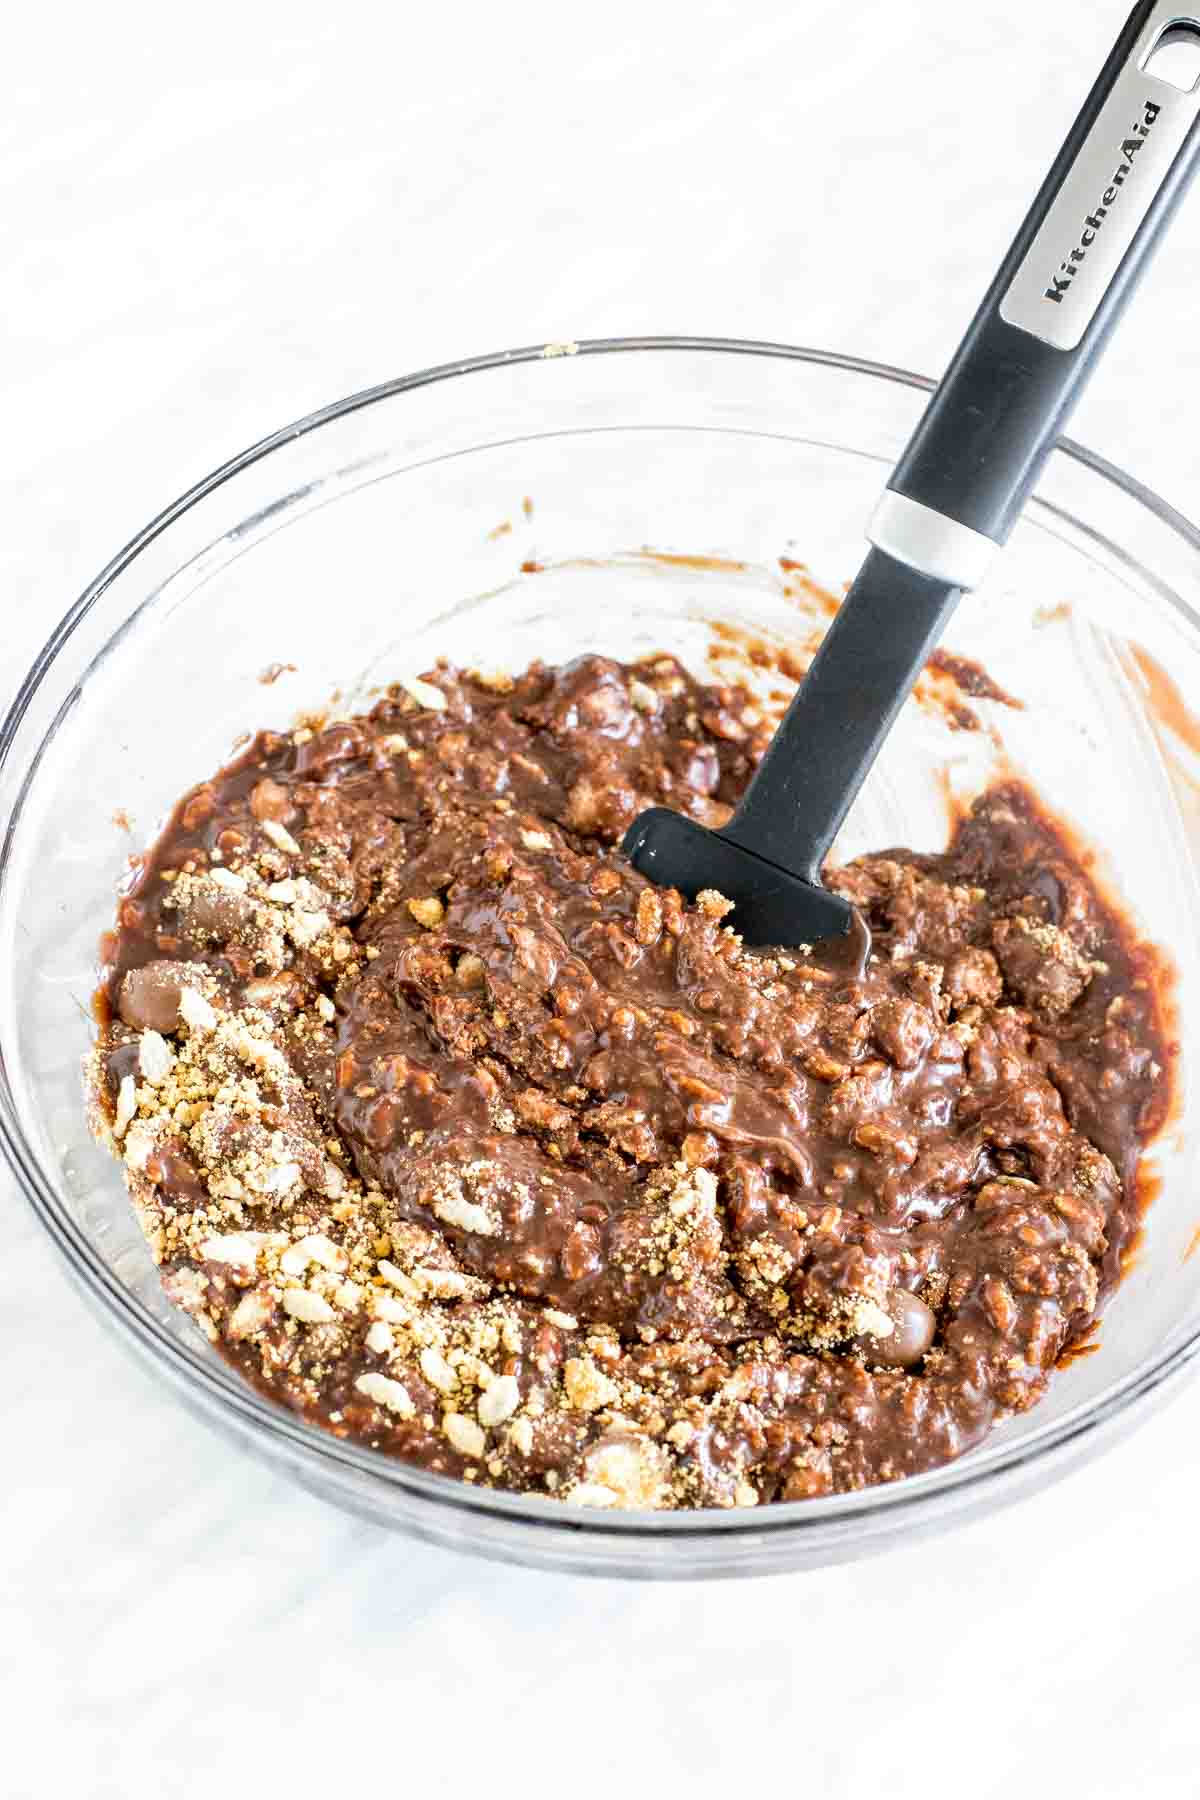 Chocolate fudge poured cereal, crushed biscuits, and candies in a bowl. 